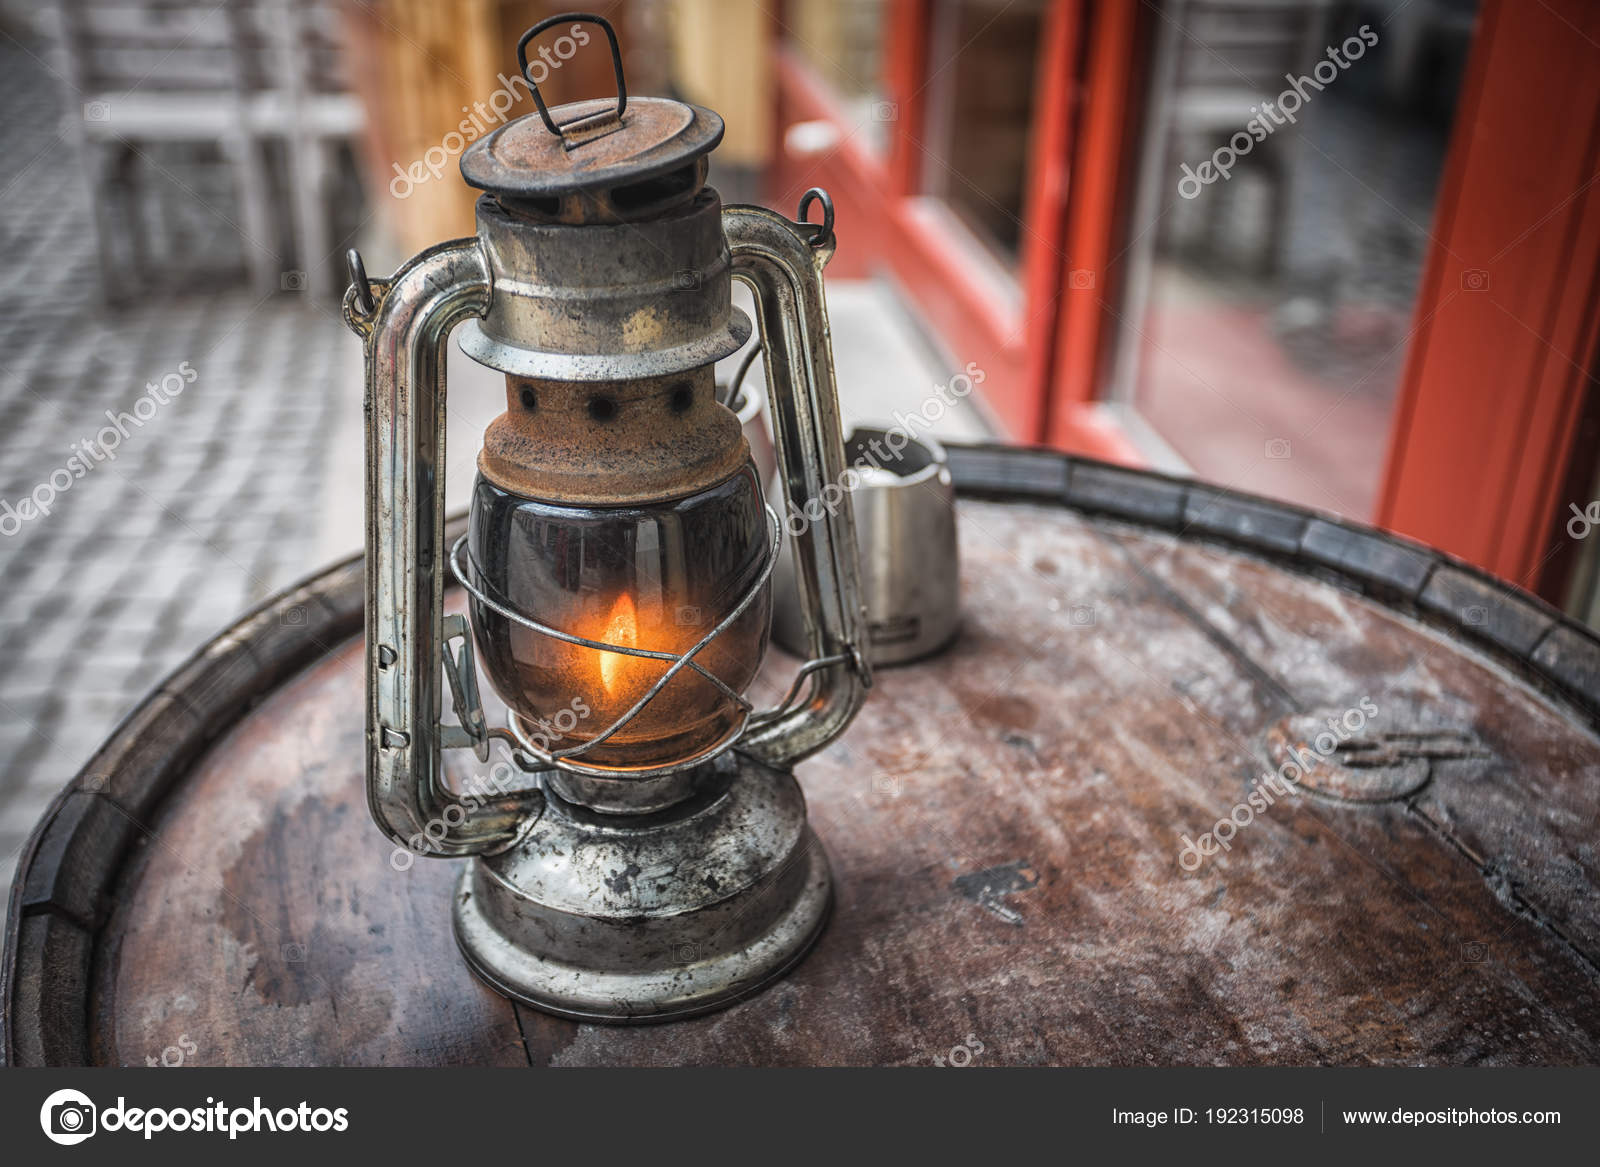 Old Fashioned Lantern On The Wooden, Old Fashioned Outdoor Lanterns